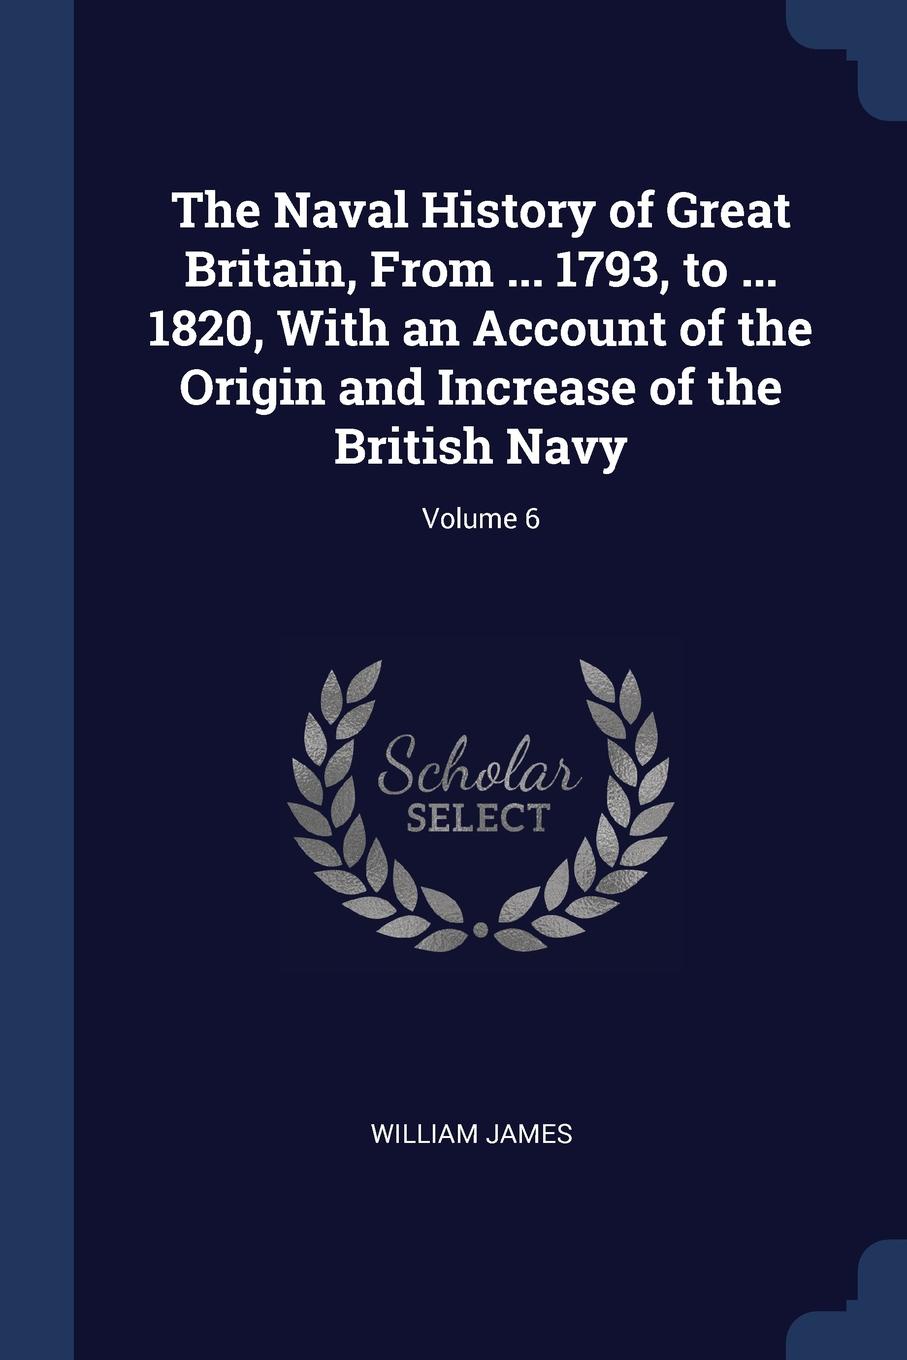 The Naval History of Great Britain, From ... 1793, to ... 1820, With an Account of the Origin and Increase of the British Navy; Volume 6